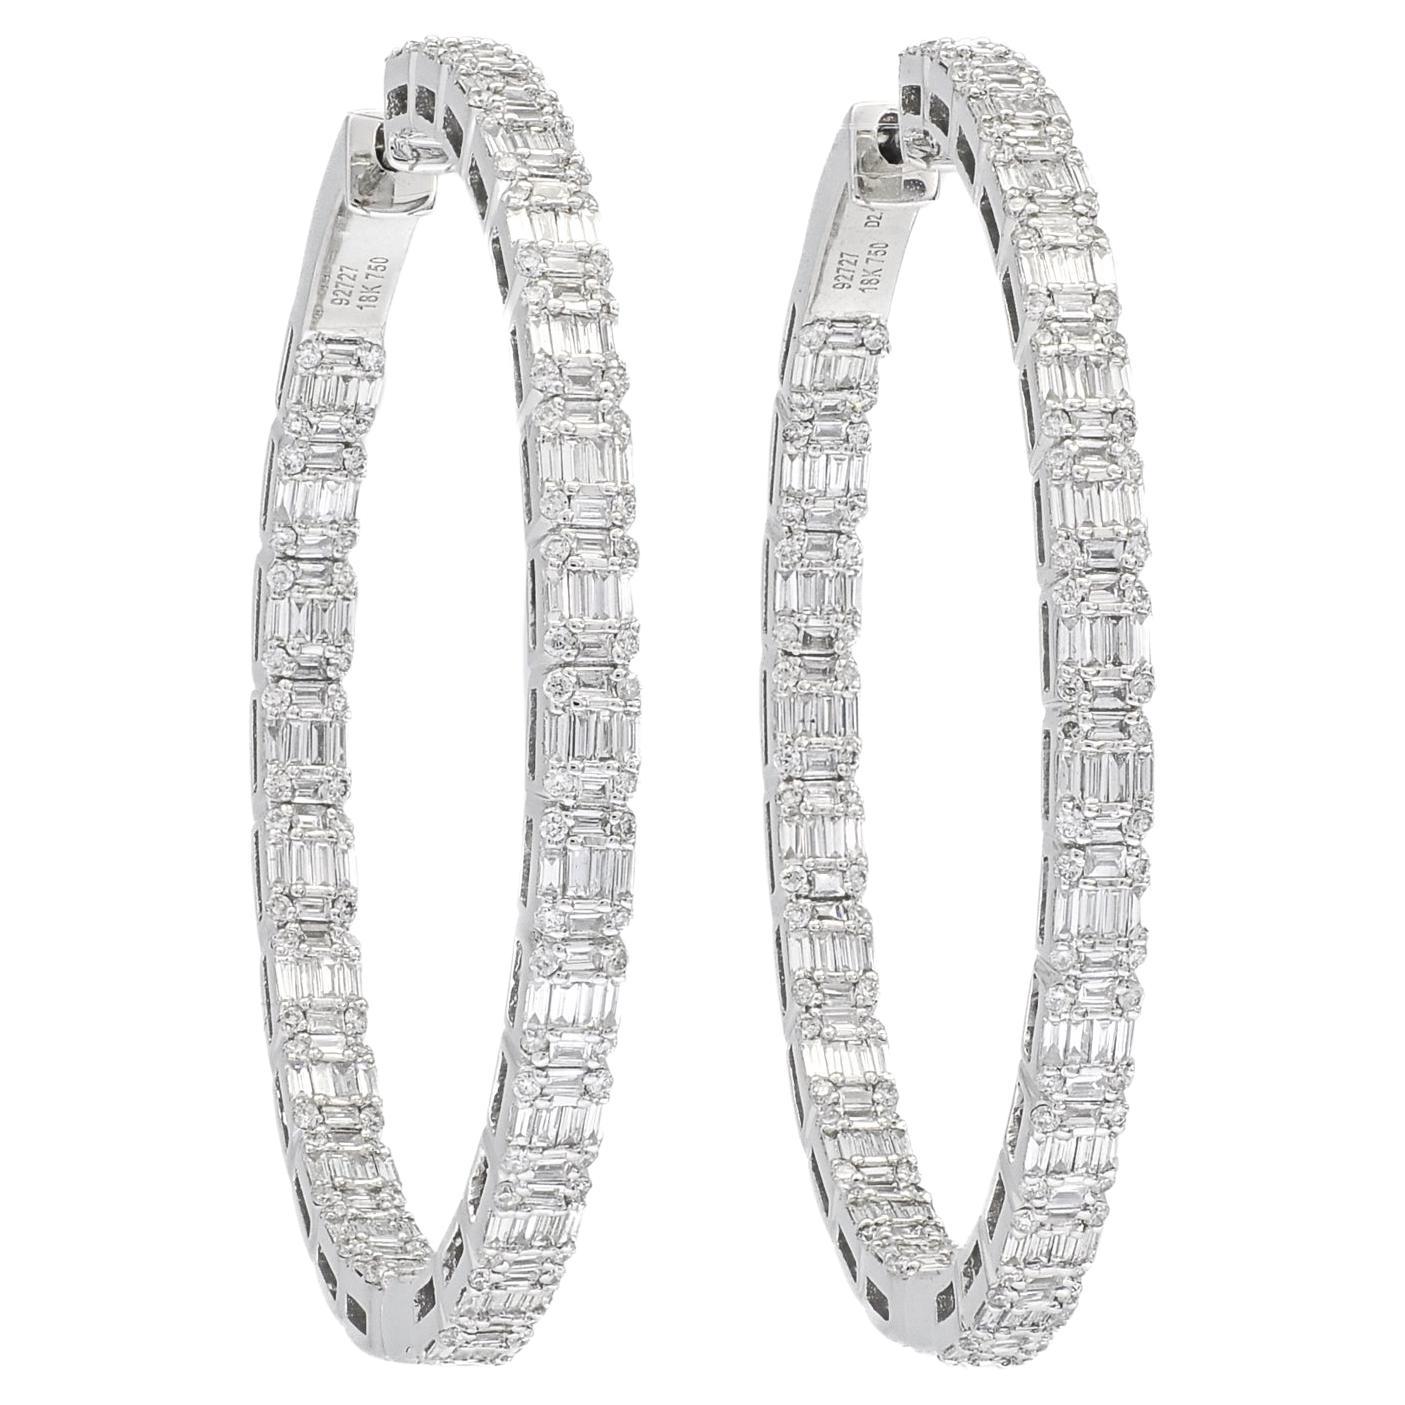  Natural Dimond 2.13 Carats 18KT White Gold 'in and Out' Hoop Earring E20248 For Sale